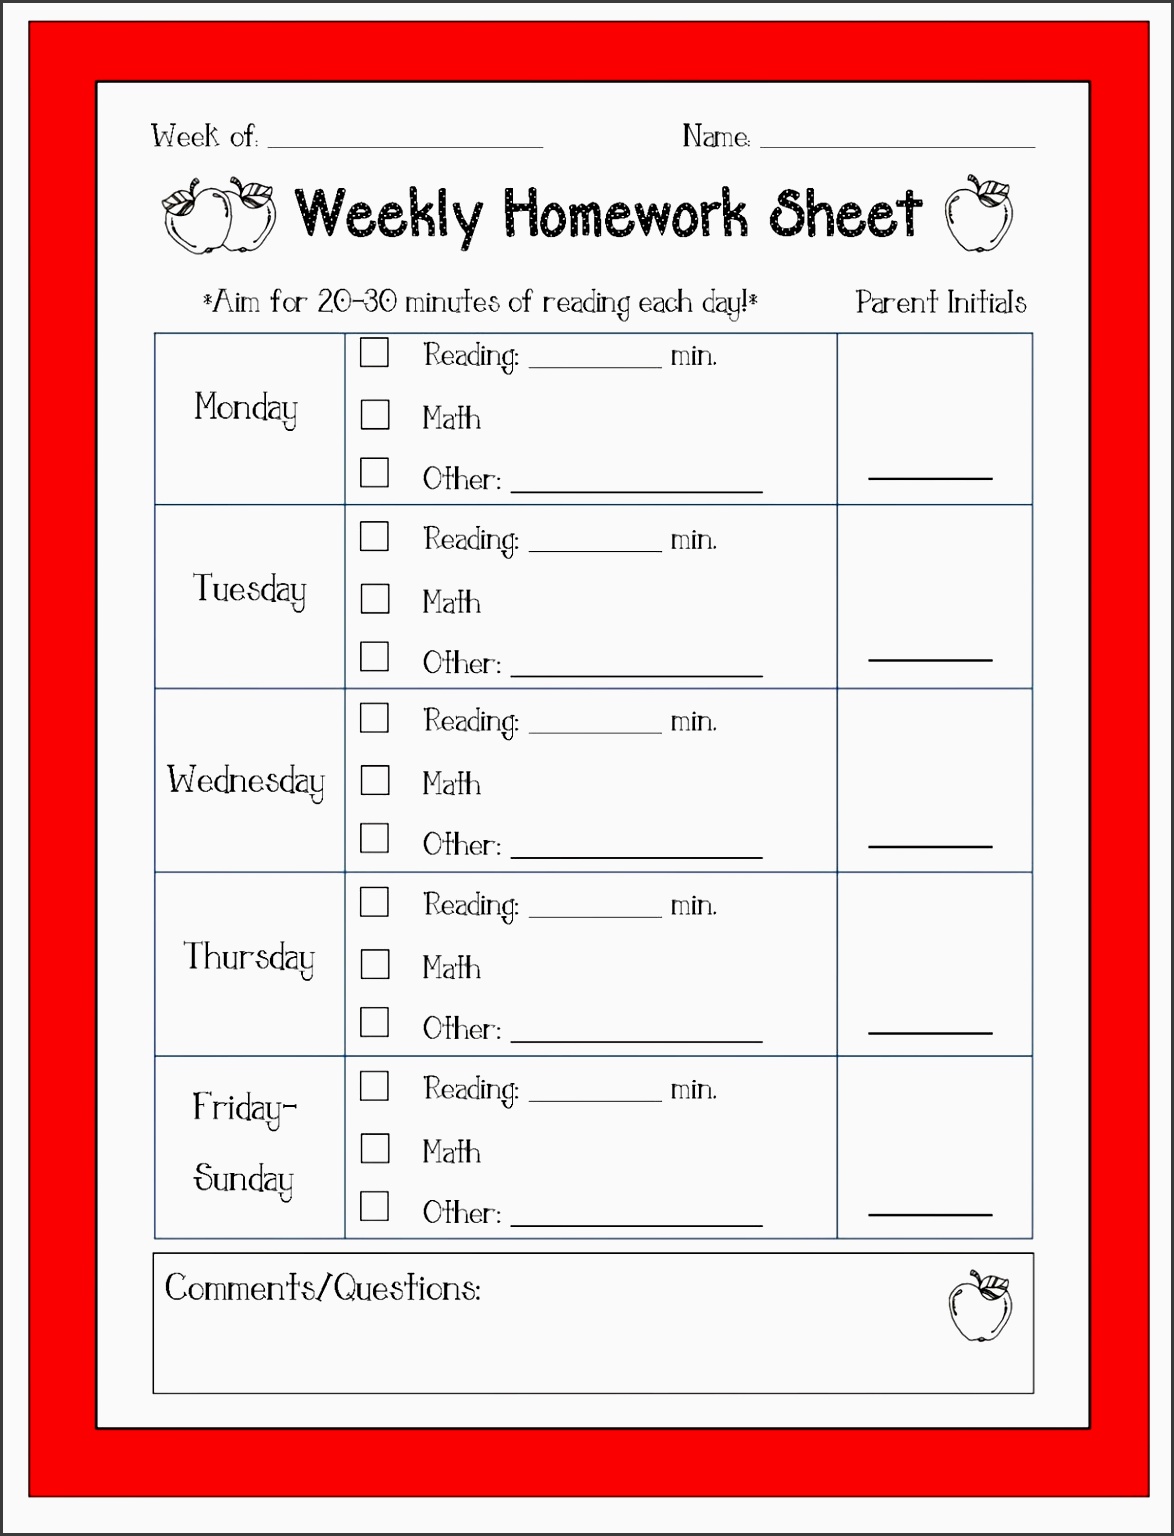 this is a free weekly homework sheet template to help keep track of students daily homework and reading assignments